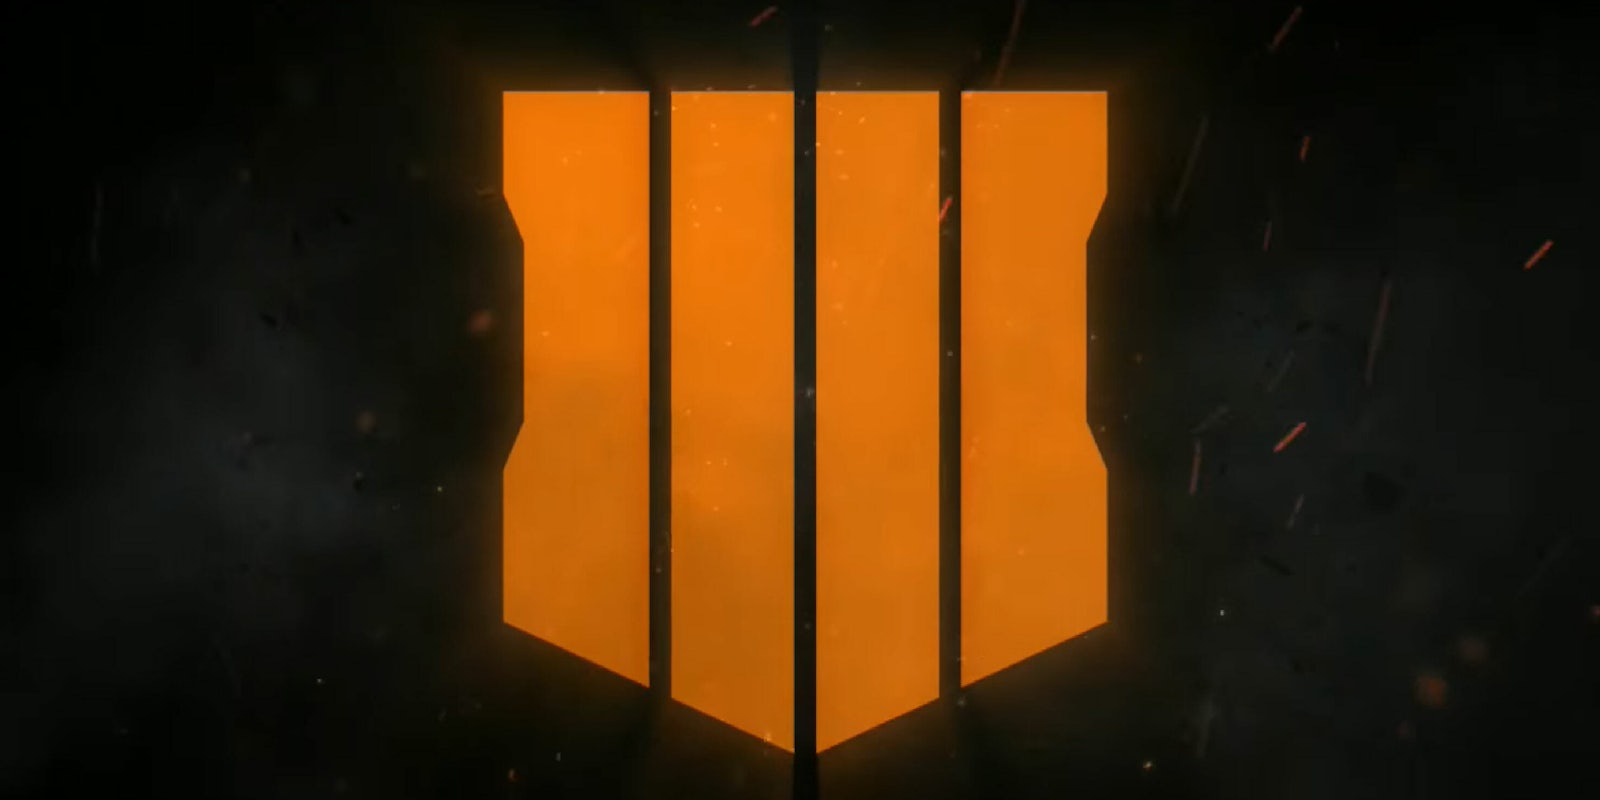 Black Ops 4 No Single Player Campaign